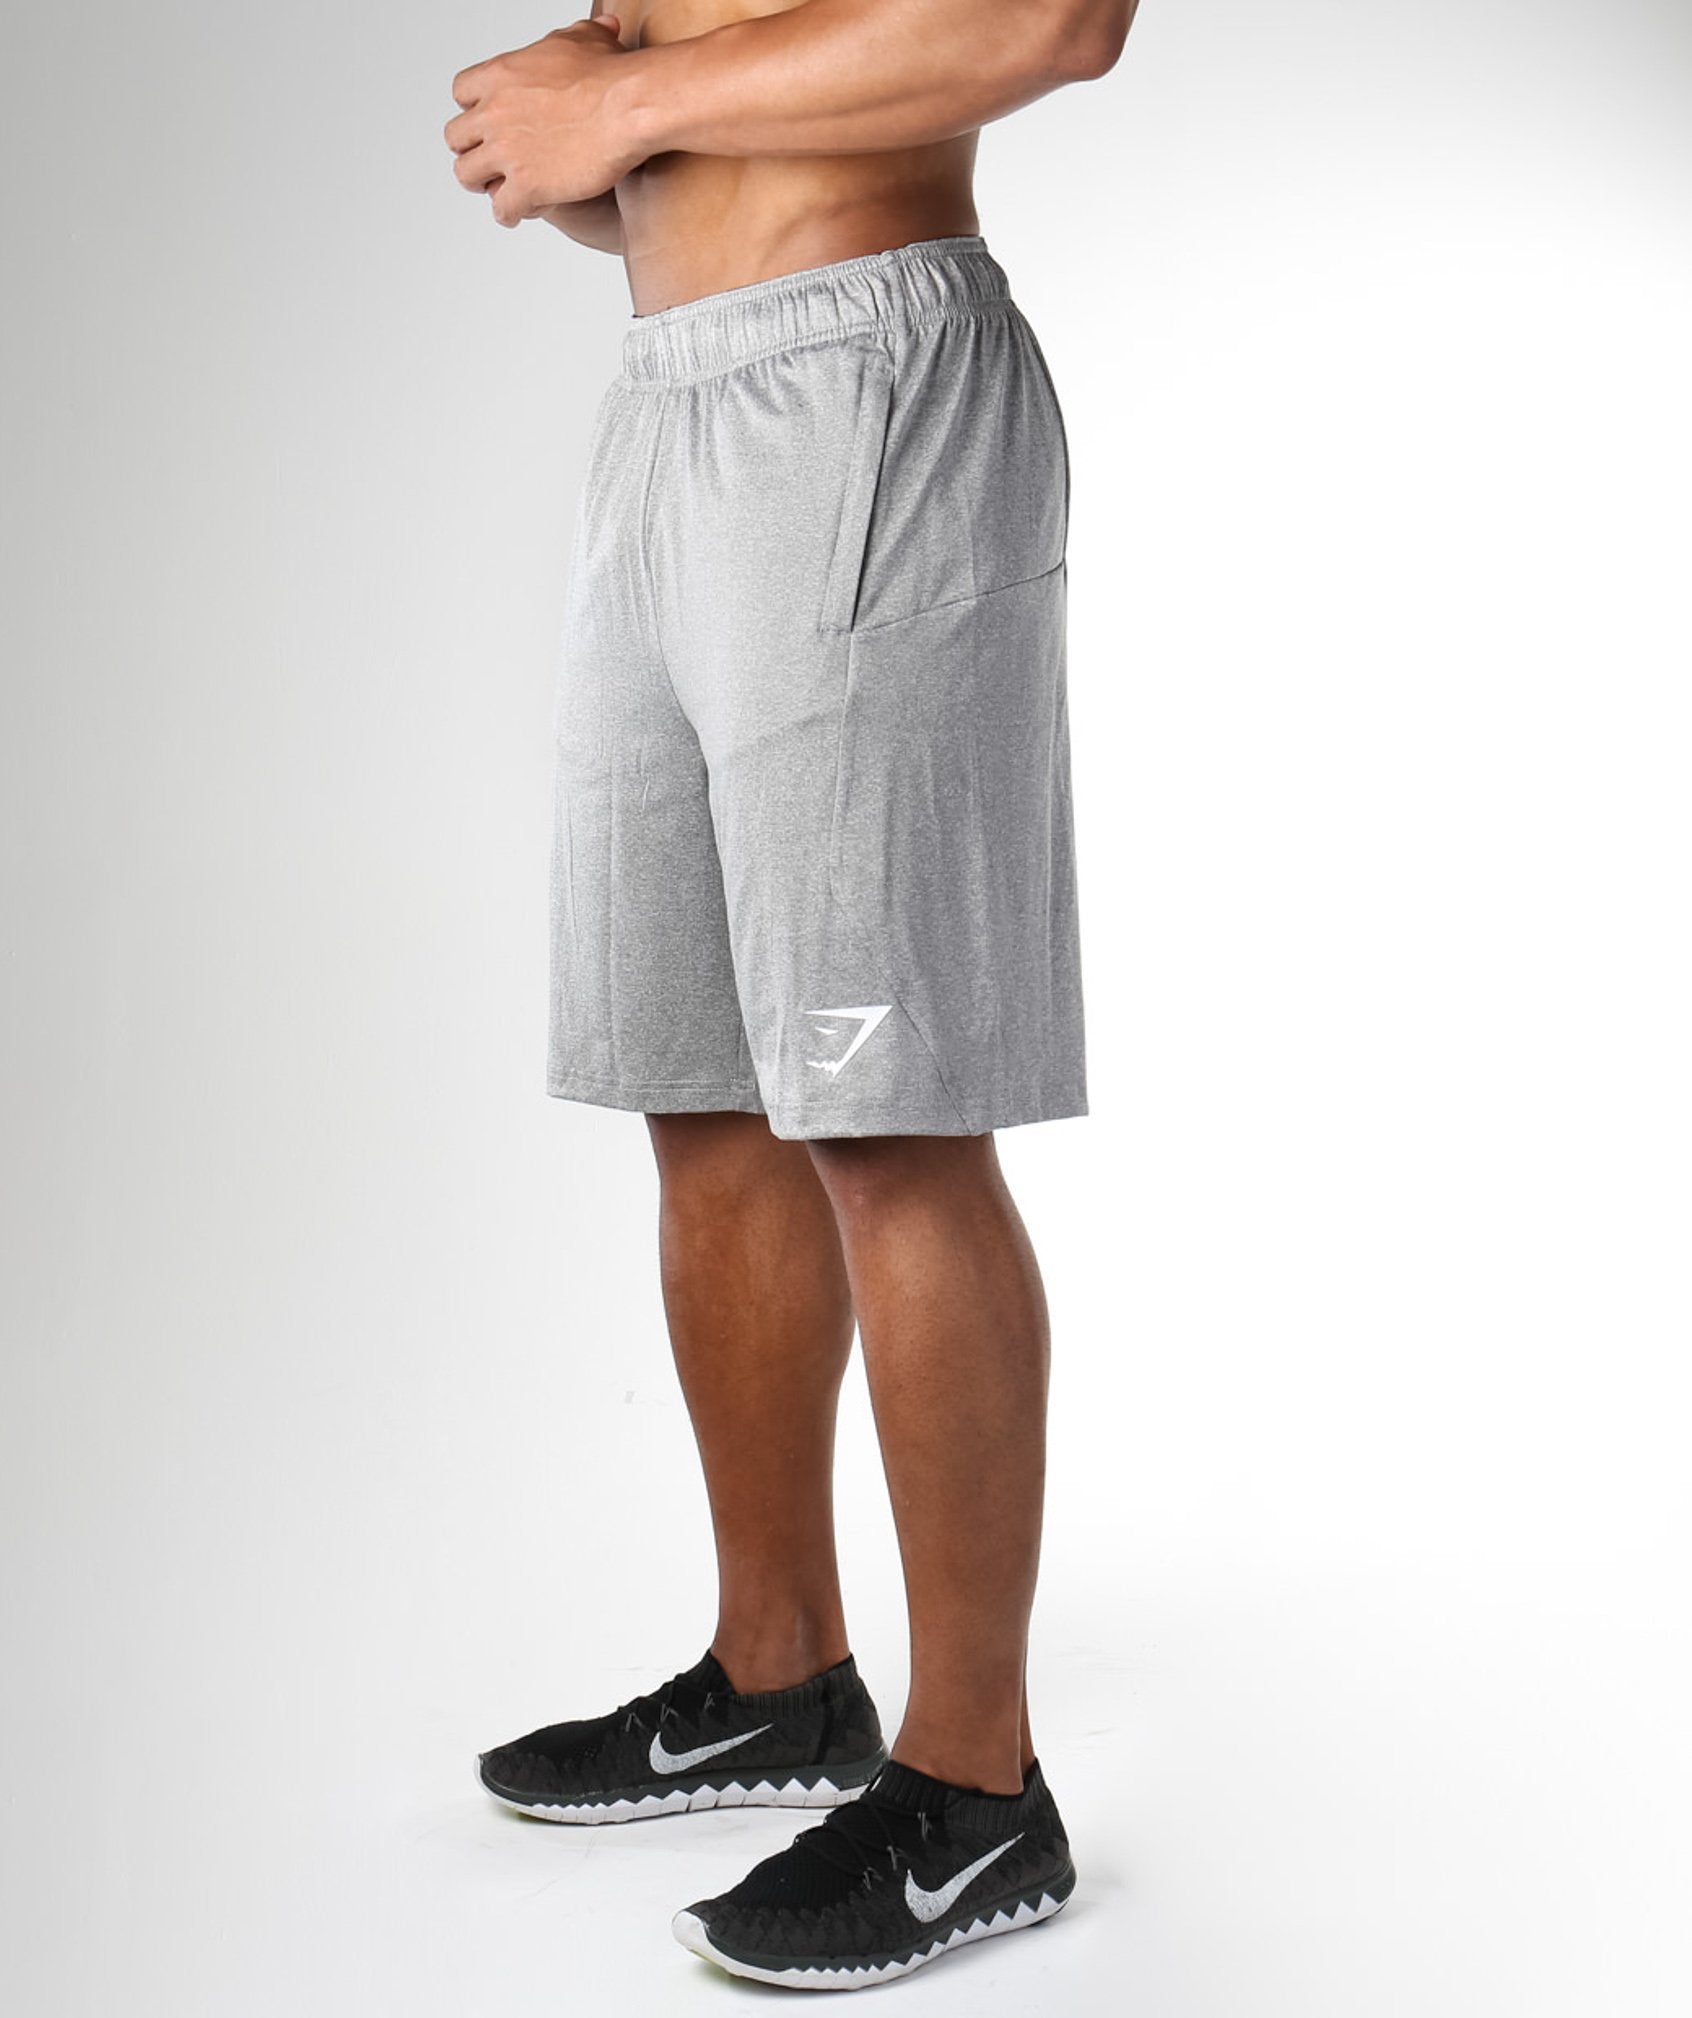 DRY Element Sweat Shorts in Grey - view 3